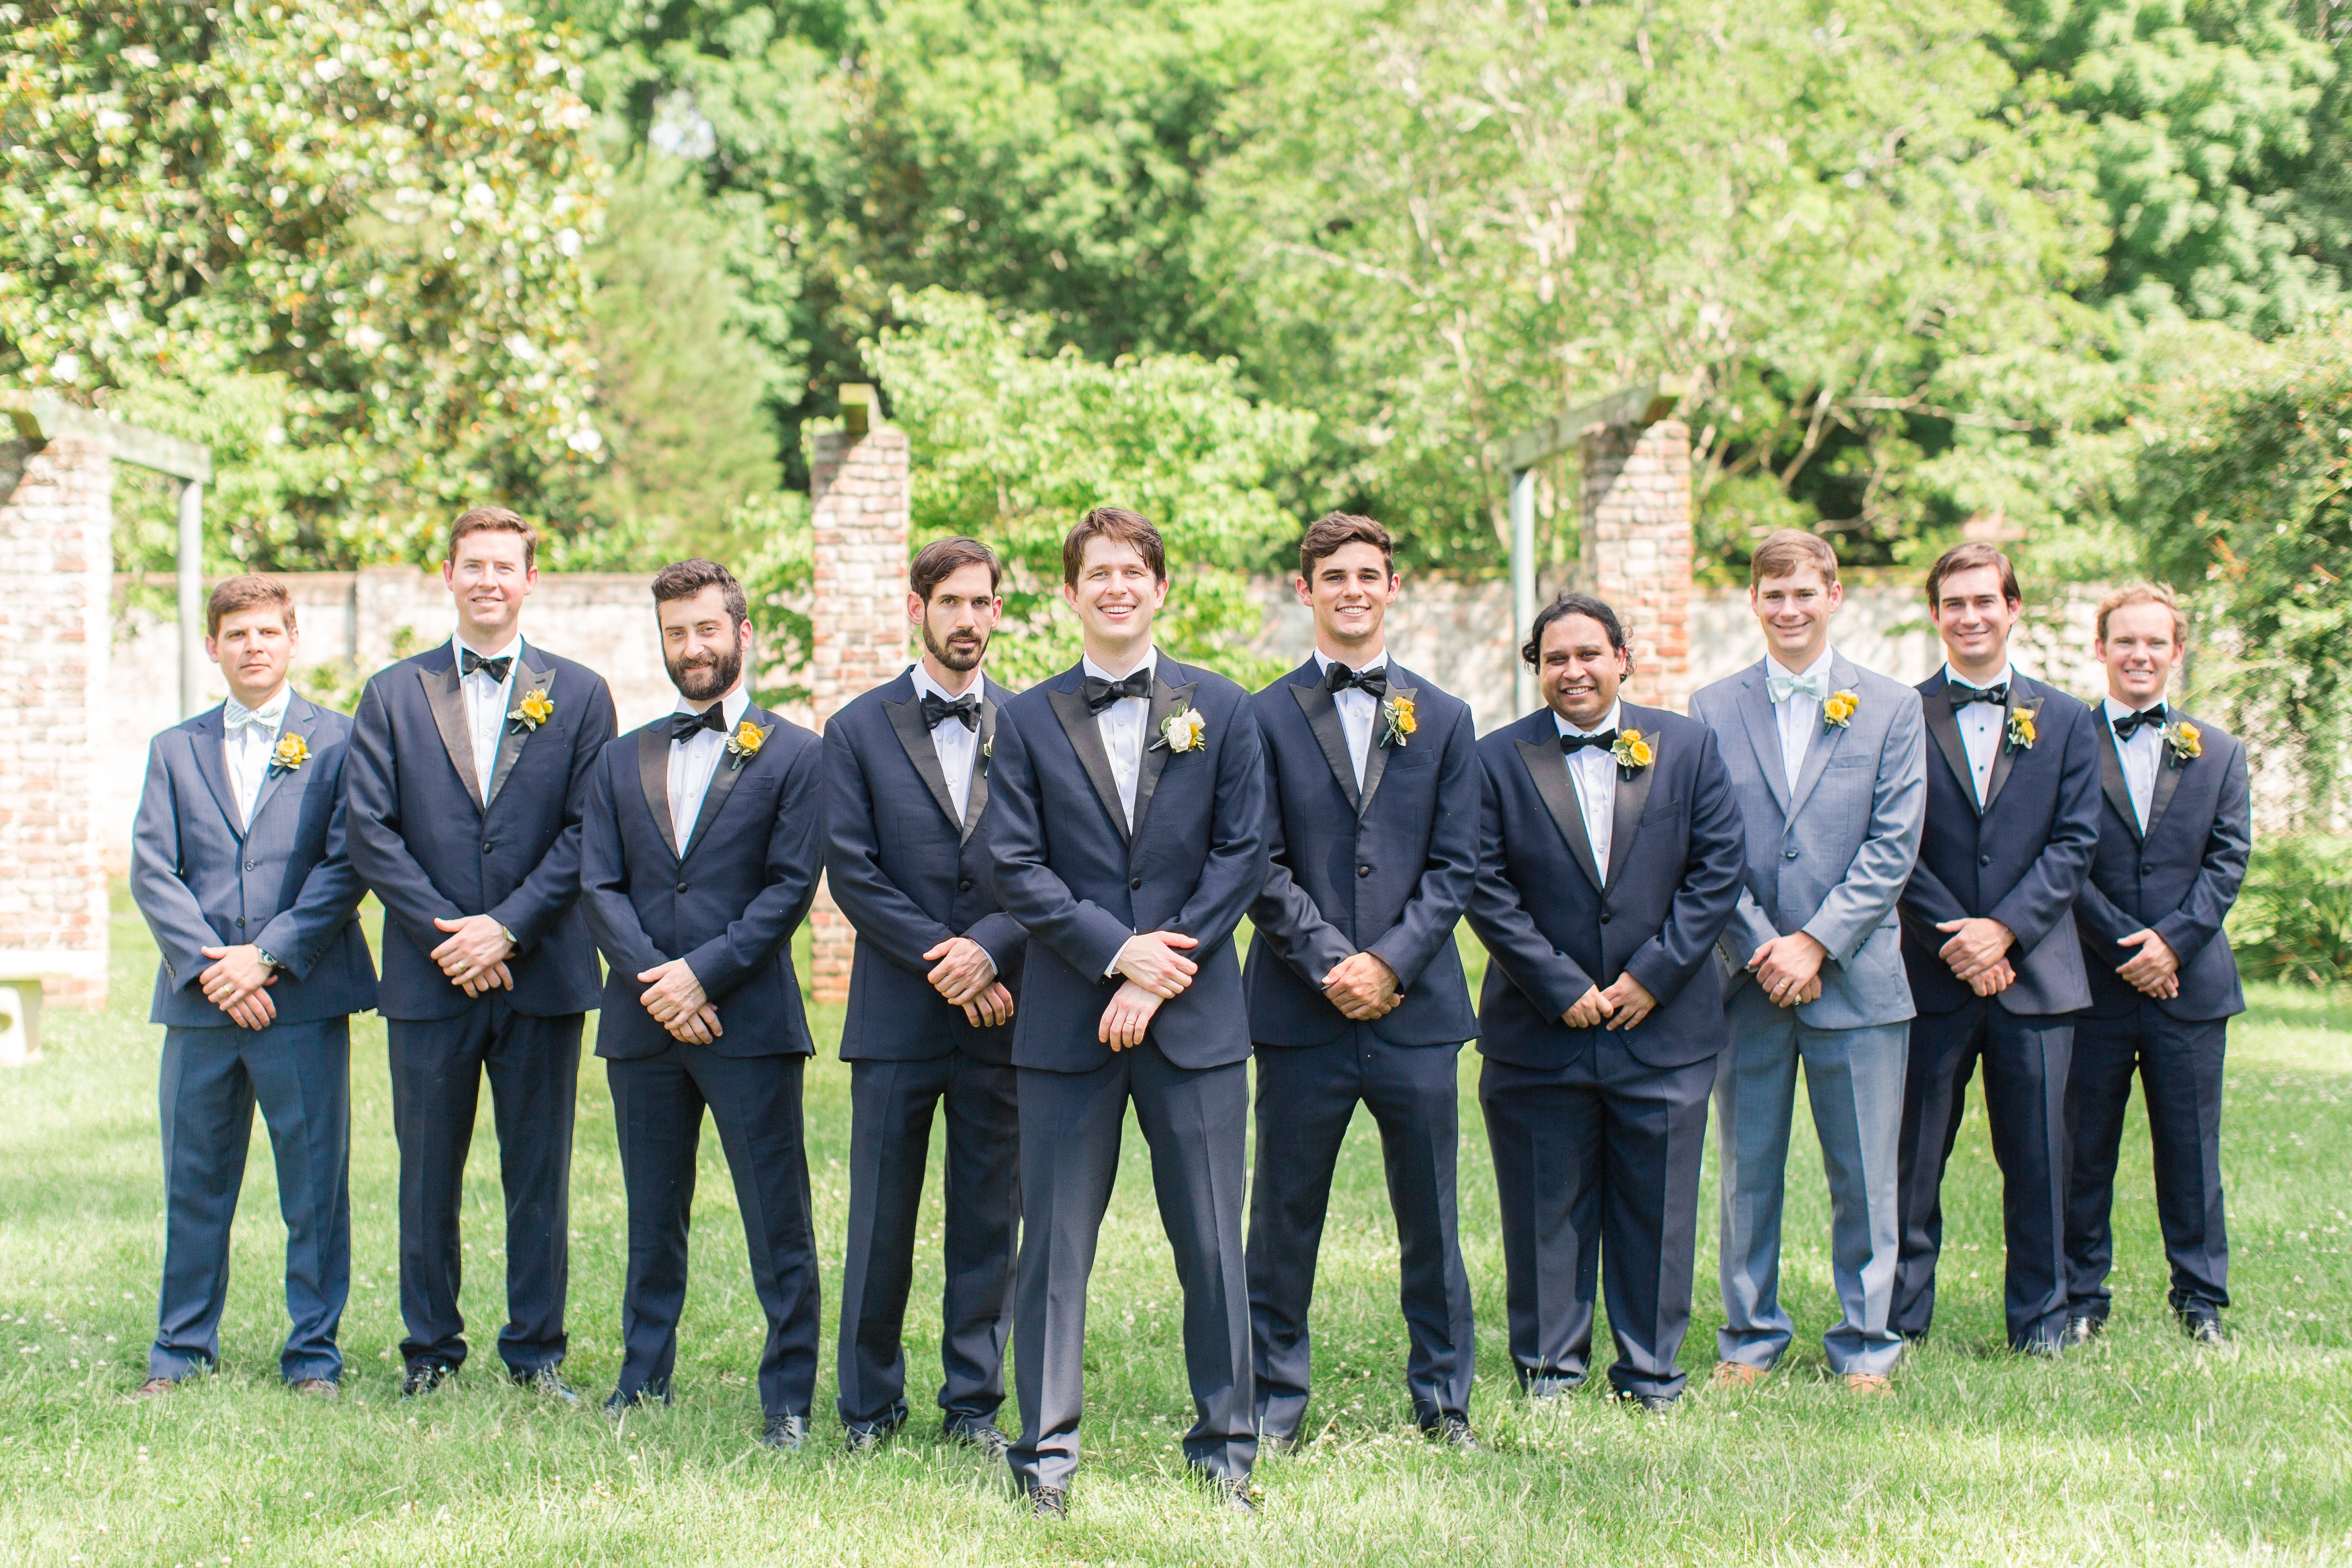 Groom + Groomsmen Portraits in the gardens at Chatham Manor